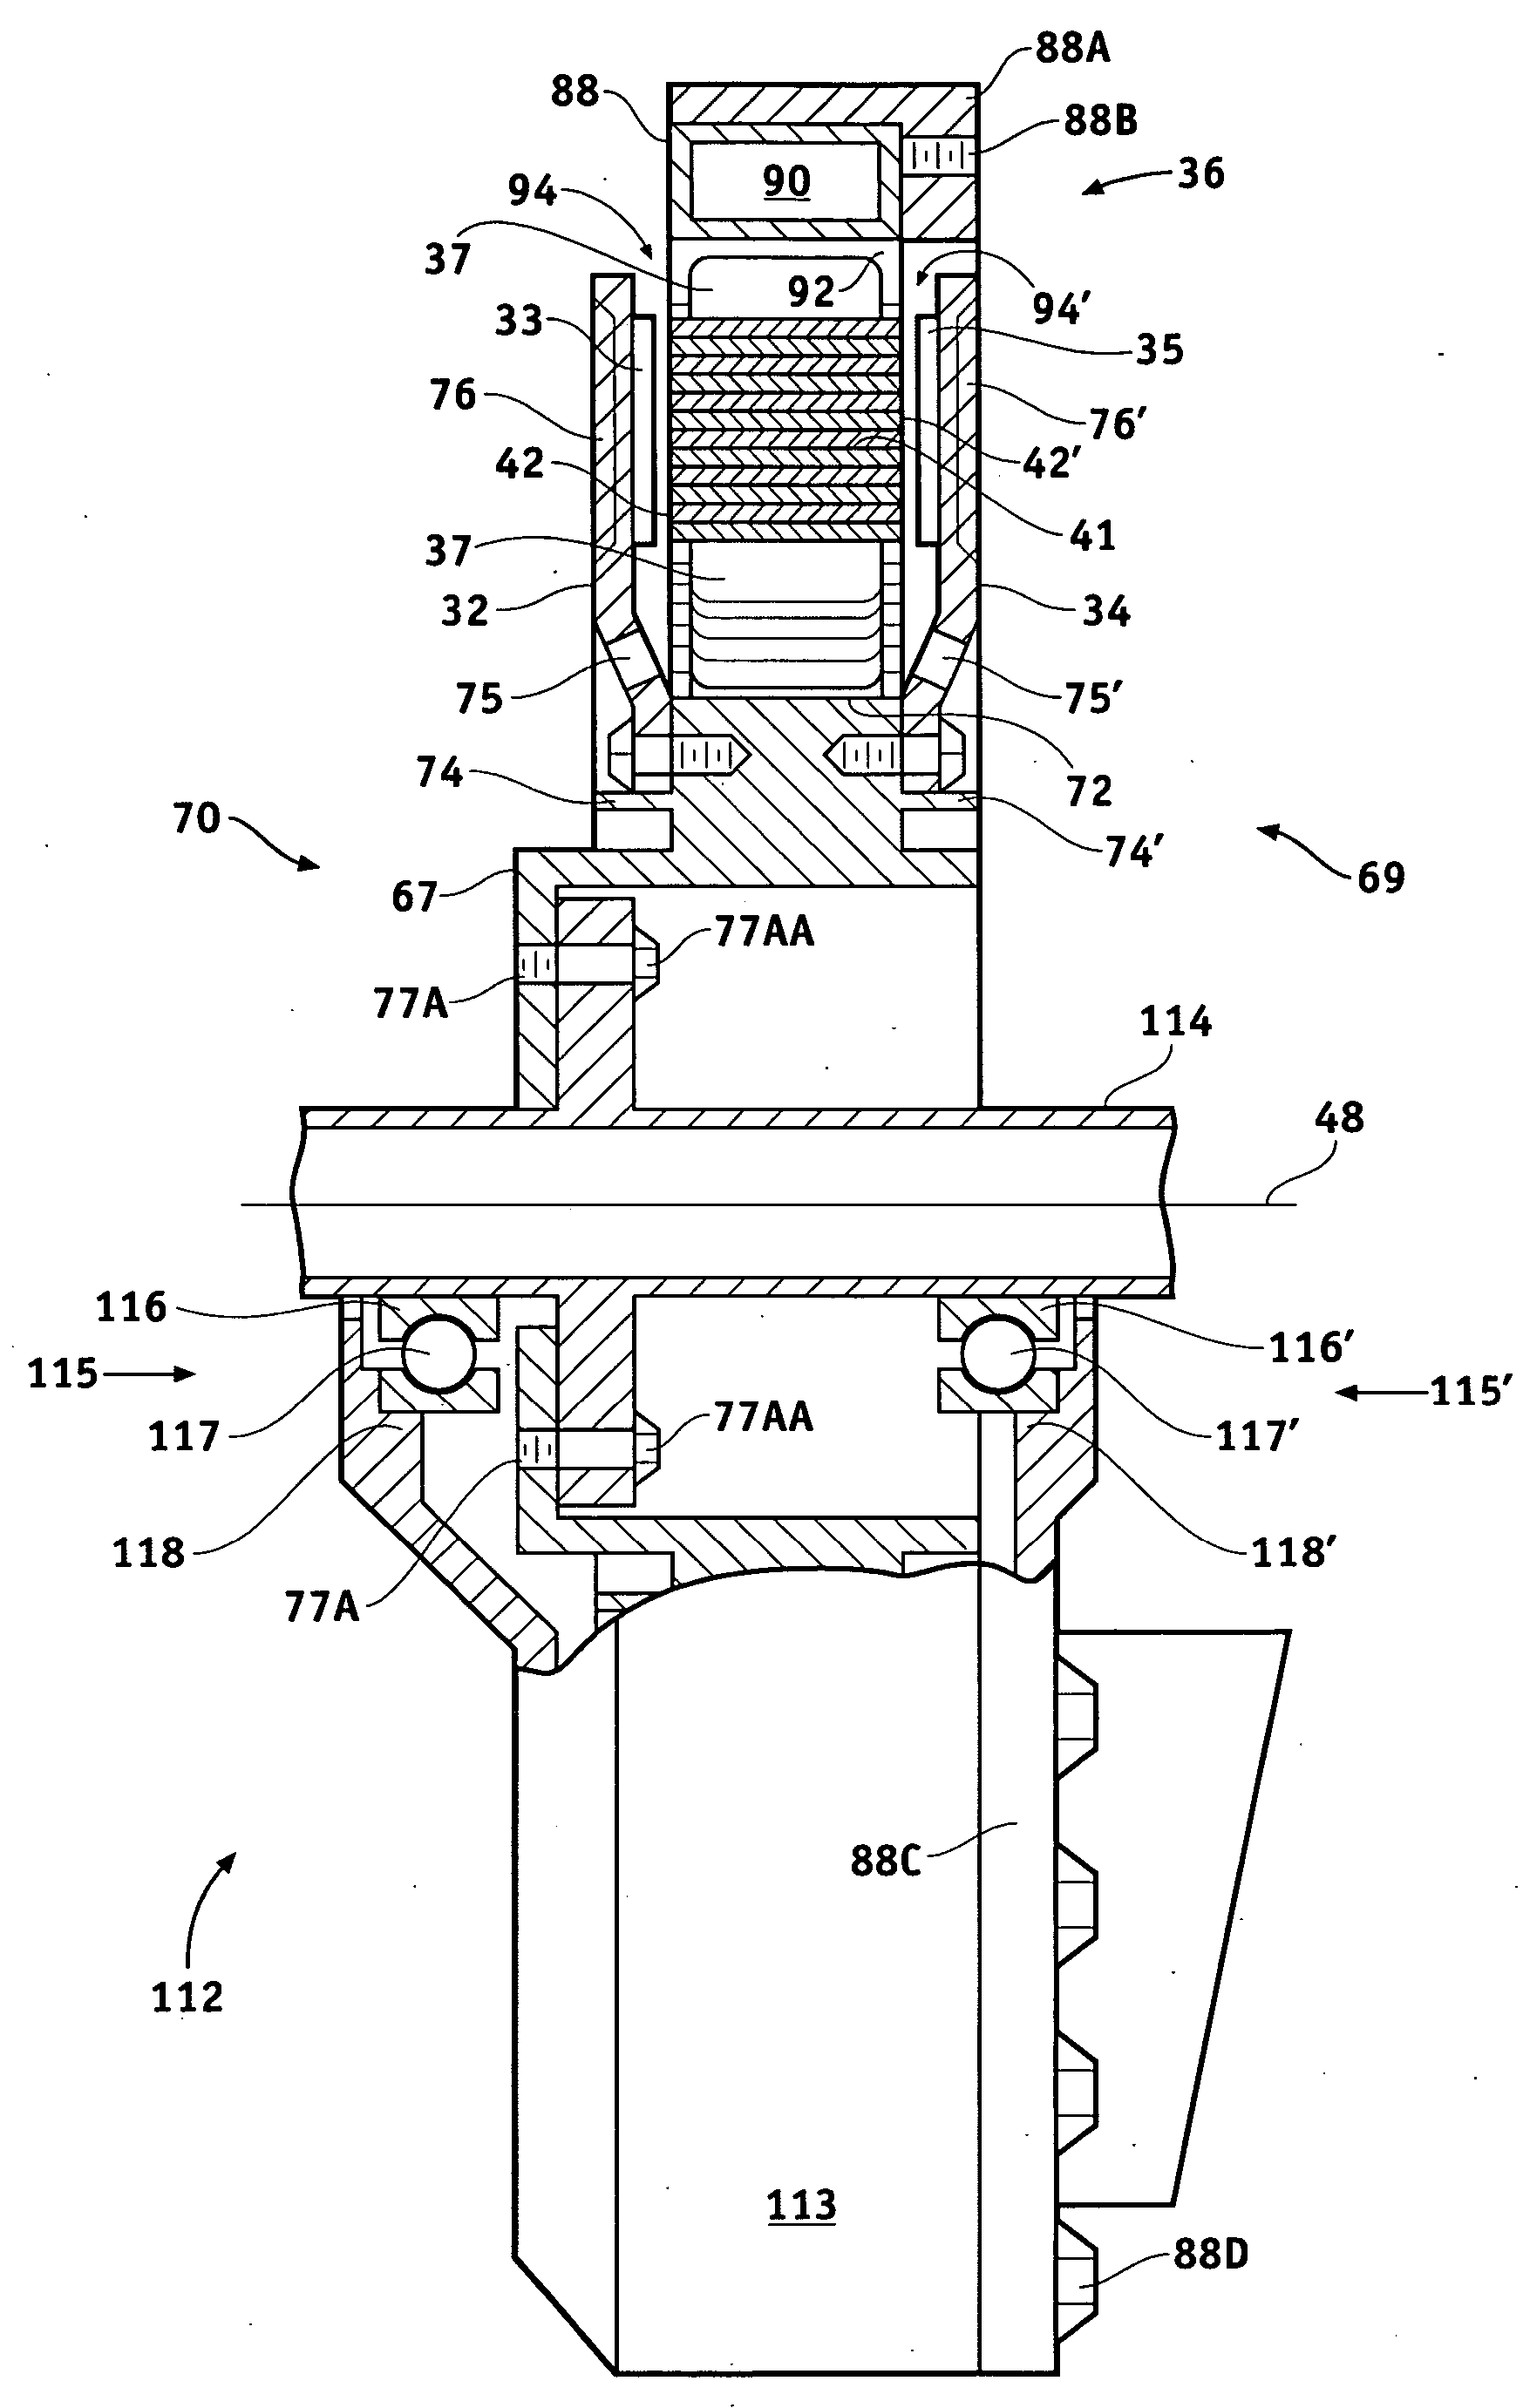 Cooling and handling of reaction torque for an axial flux motor